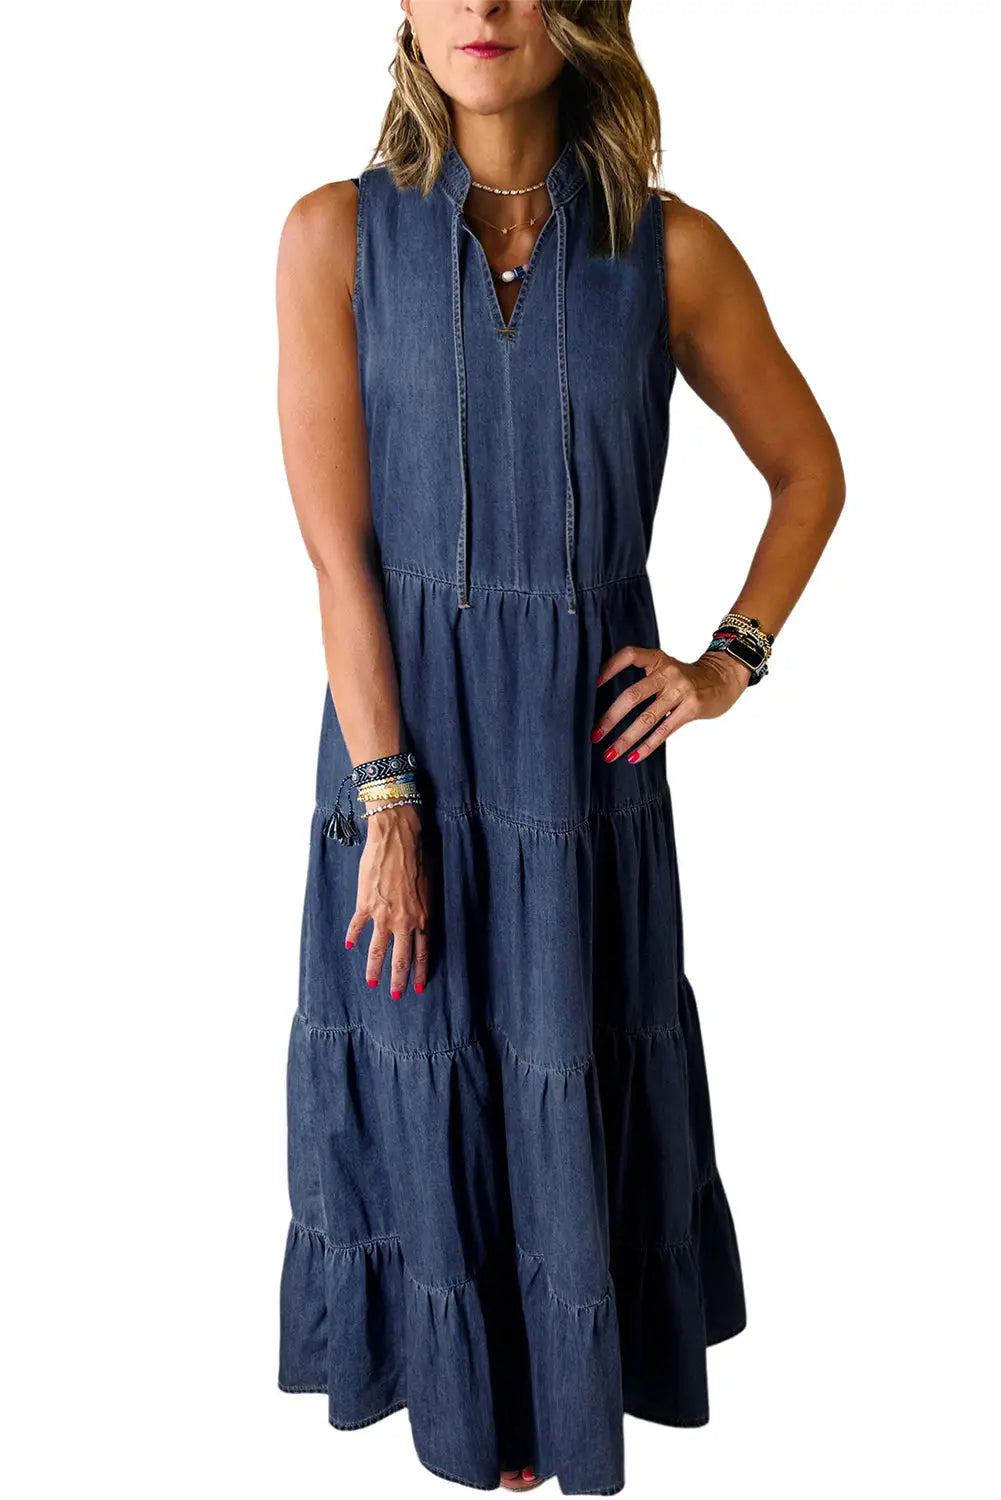 Real teal sleeveless tiered chambray maxi dress - dresses/maxi dresses